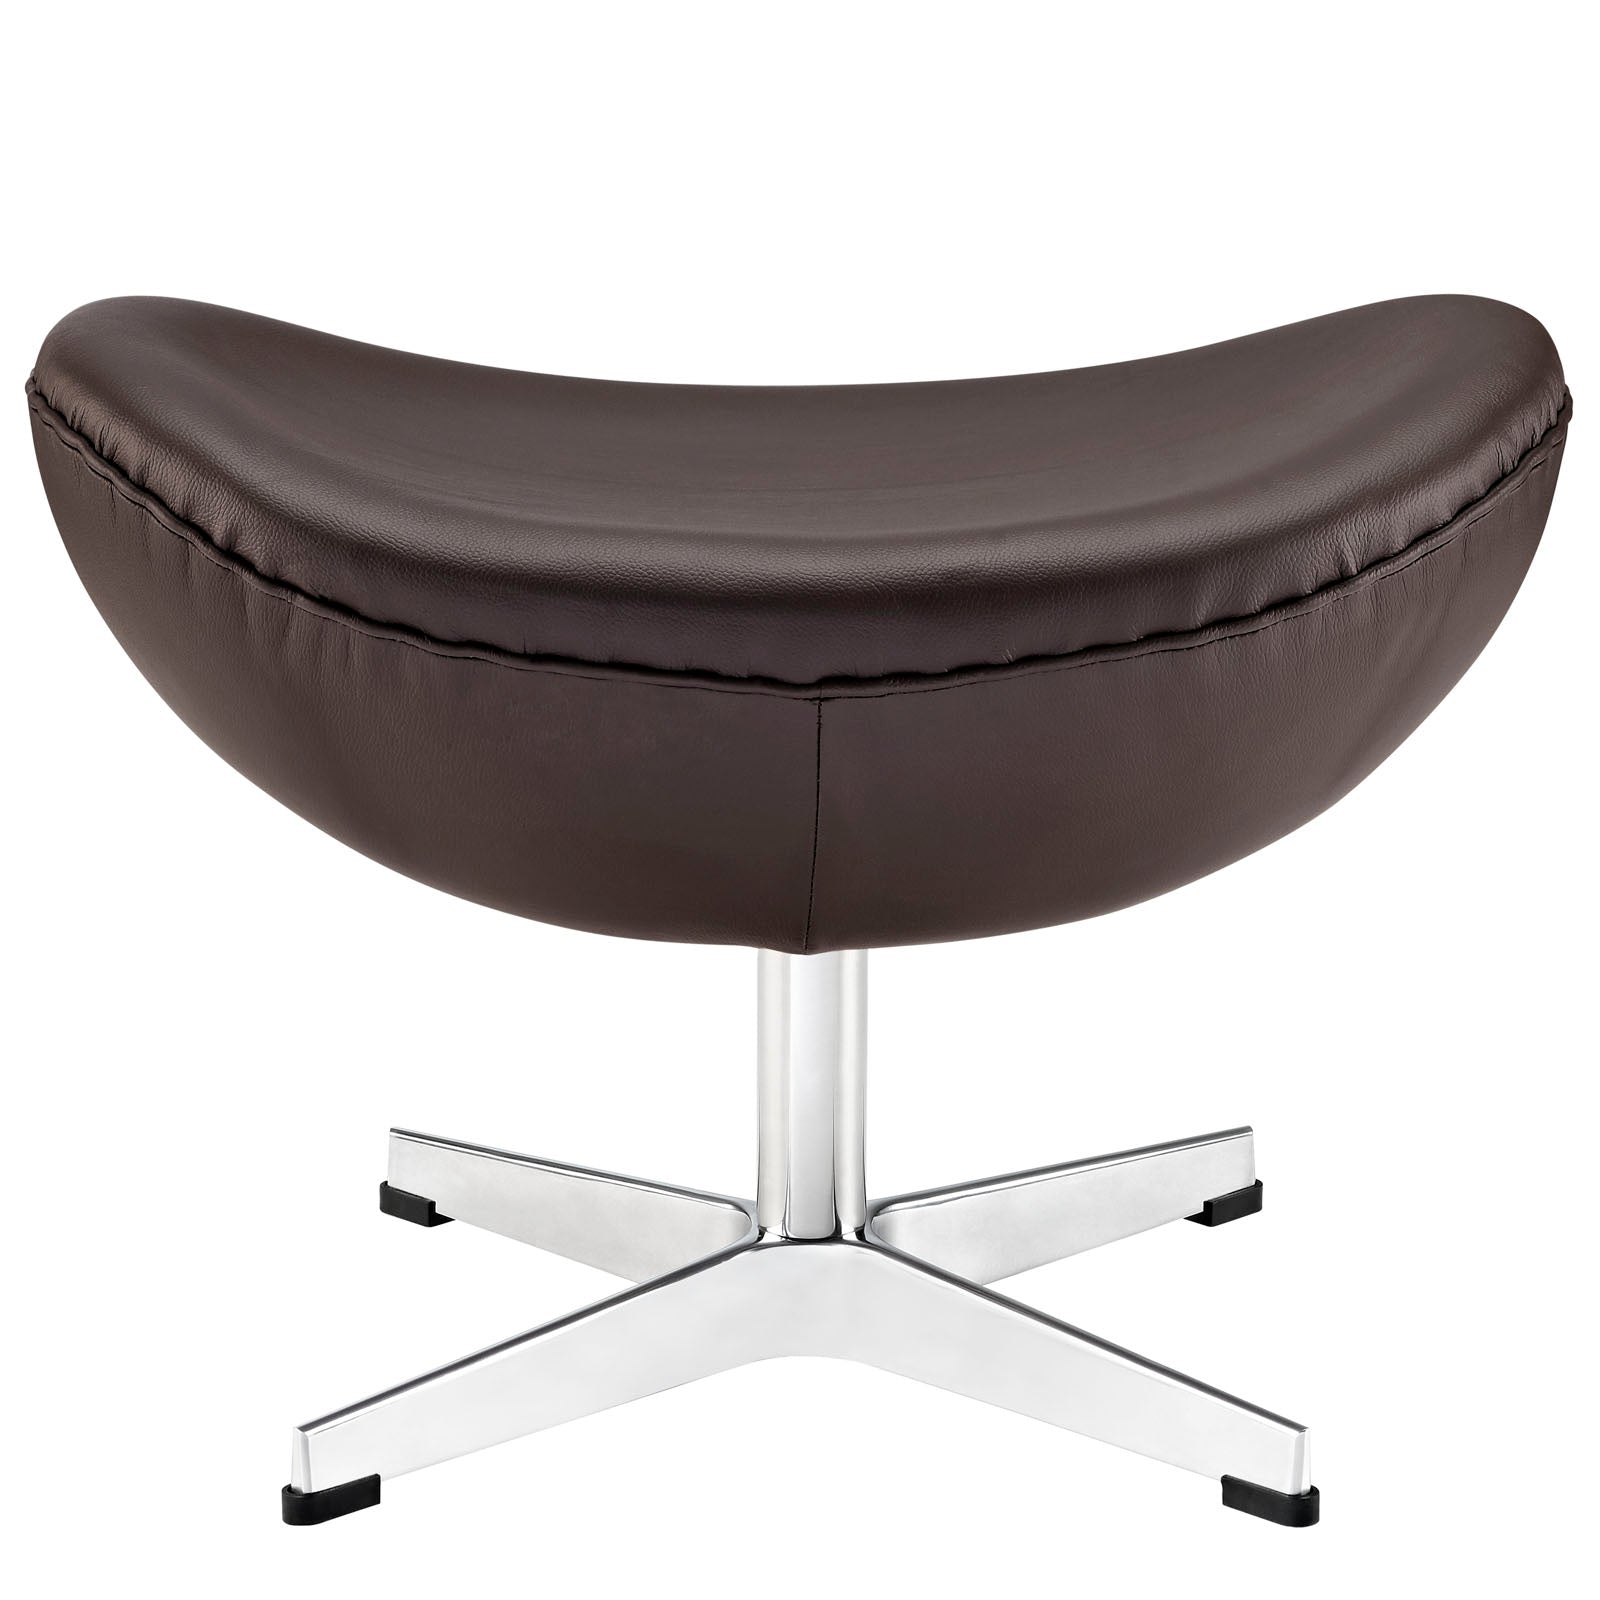 Modway Ottomans & Stools - Glove Leather Ottoman Brown